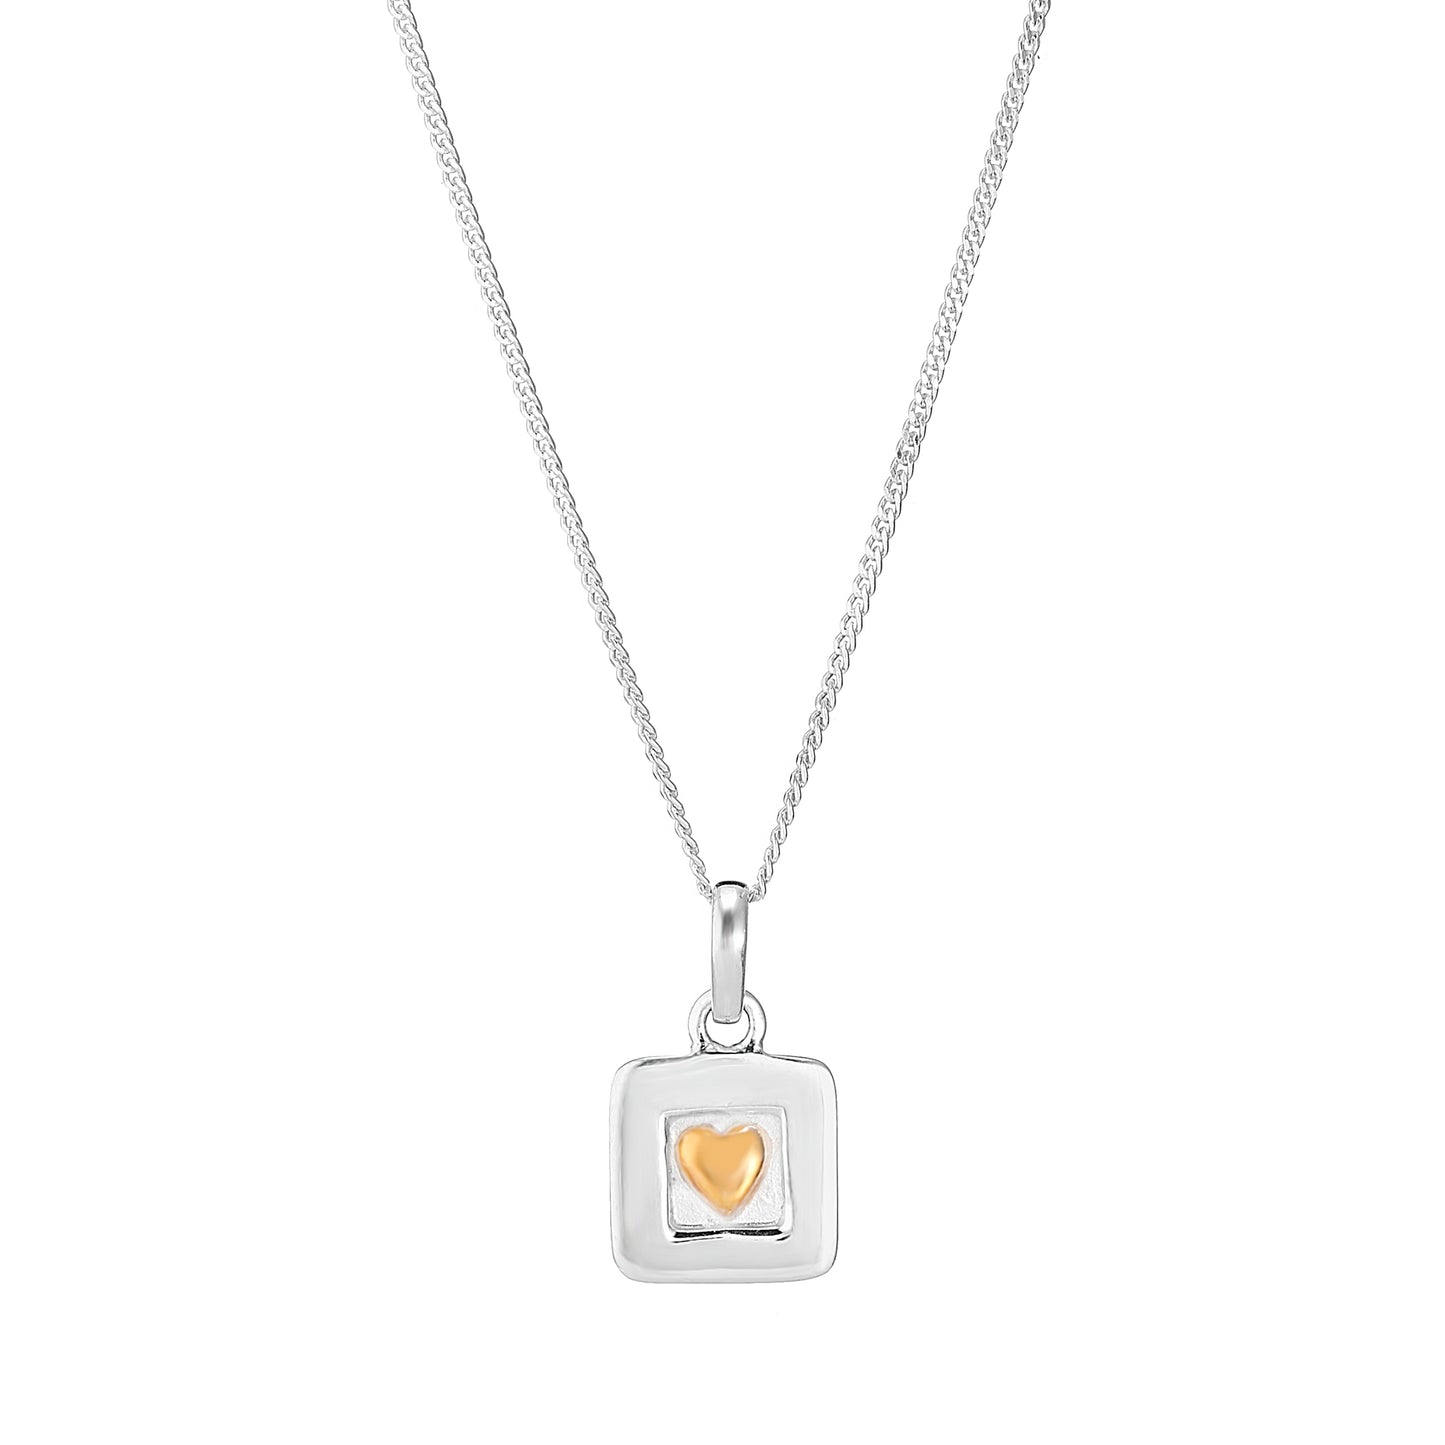 Sterling Silver and Gold Plated Heart Pendant Square and Silver Chain